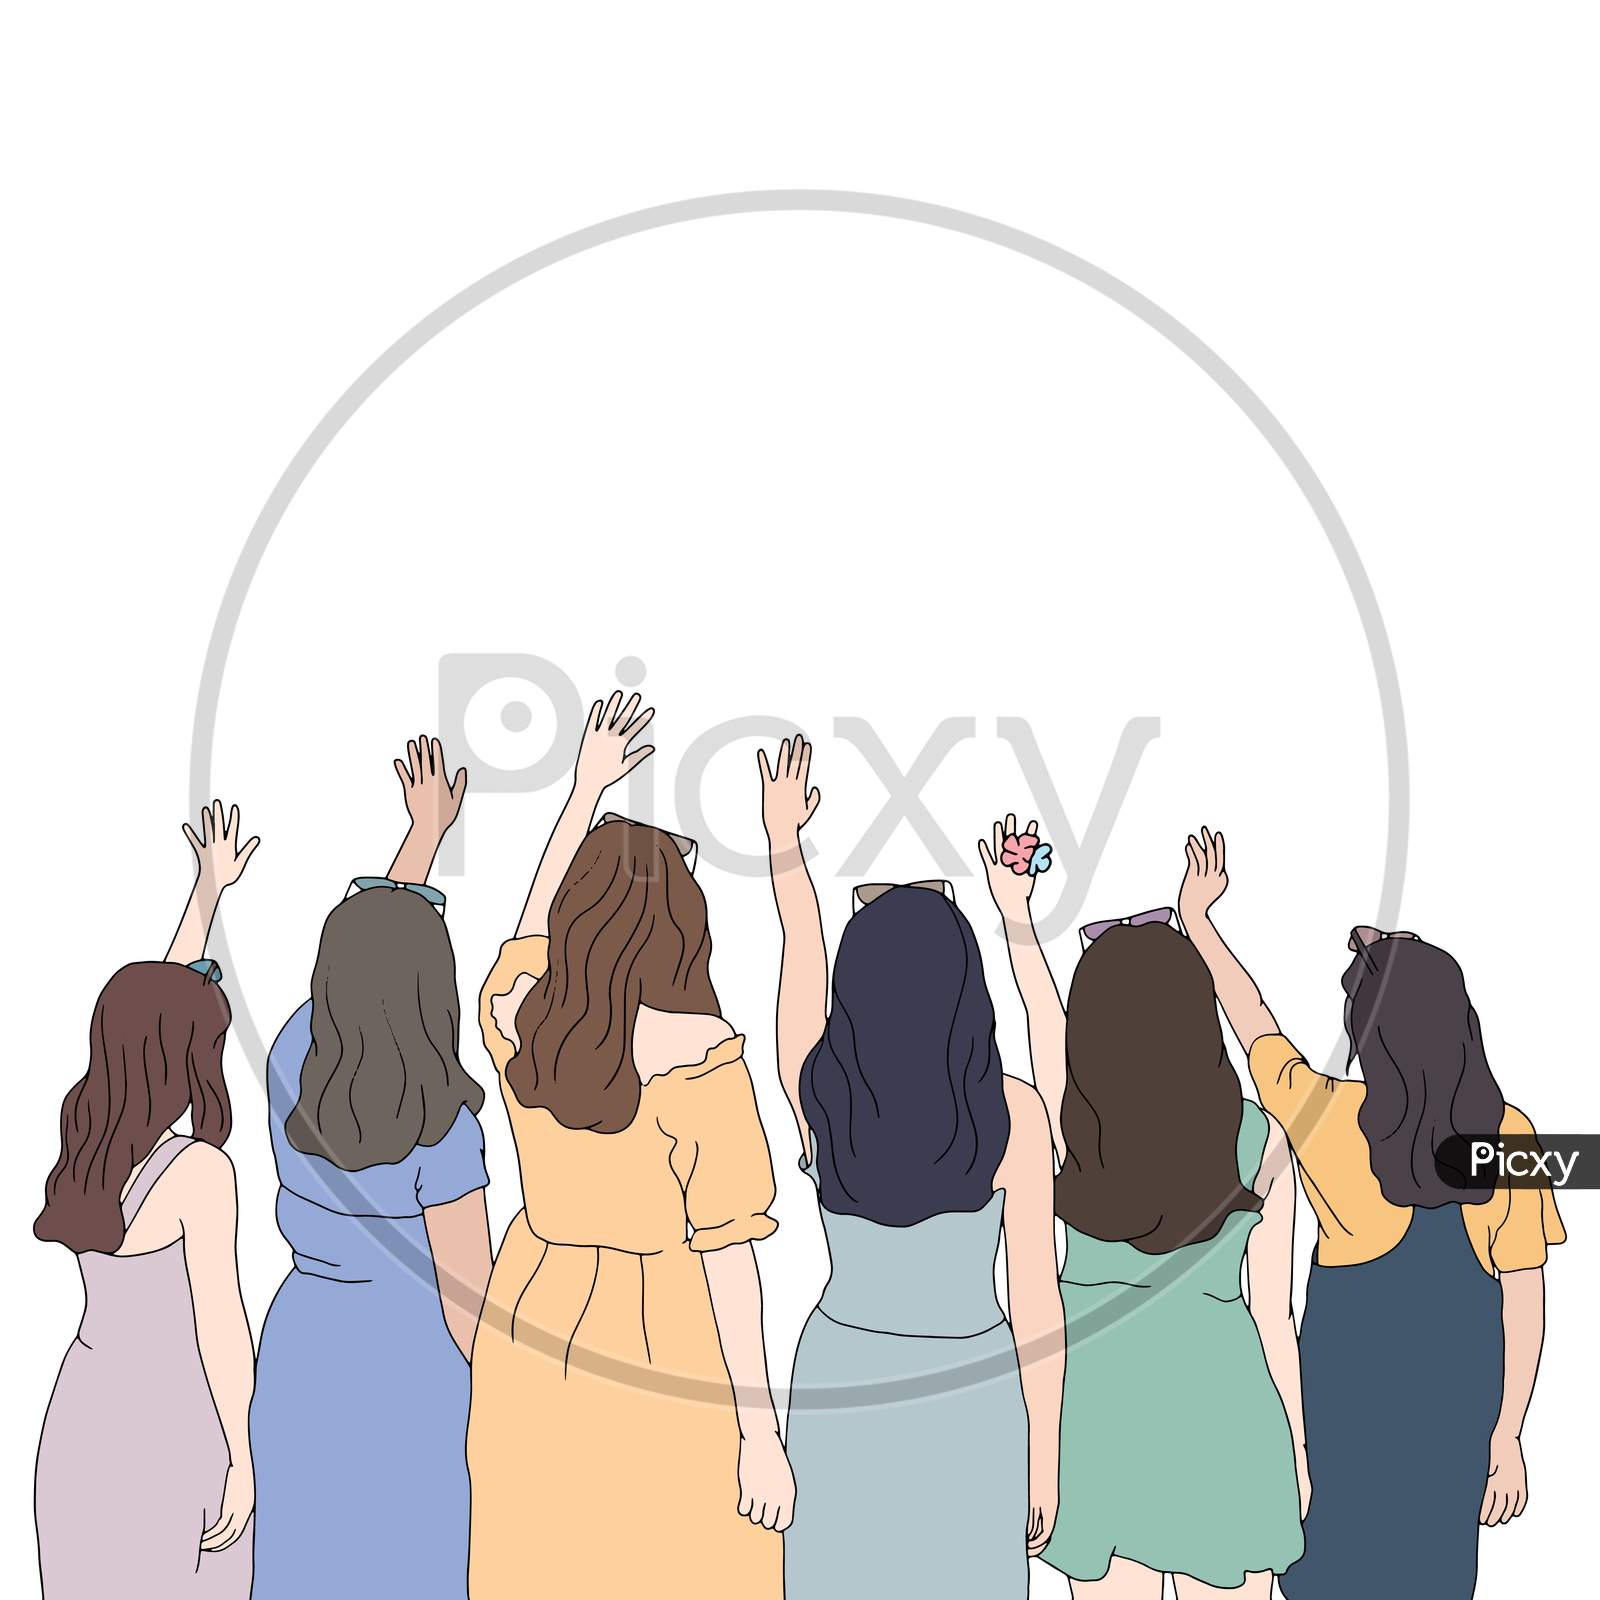 A Group Of Girls Waving Their Hands In The Air, Friends Time, Flat Colorful Illustration Of People For Friendship Day. Hand-Drawn Character Illustration Of Happy People.